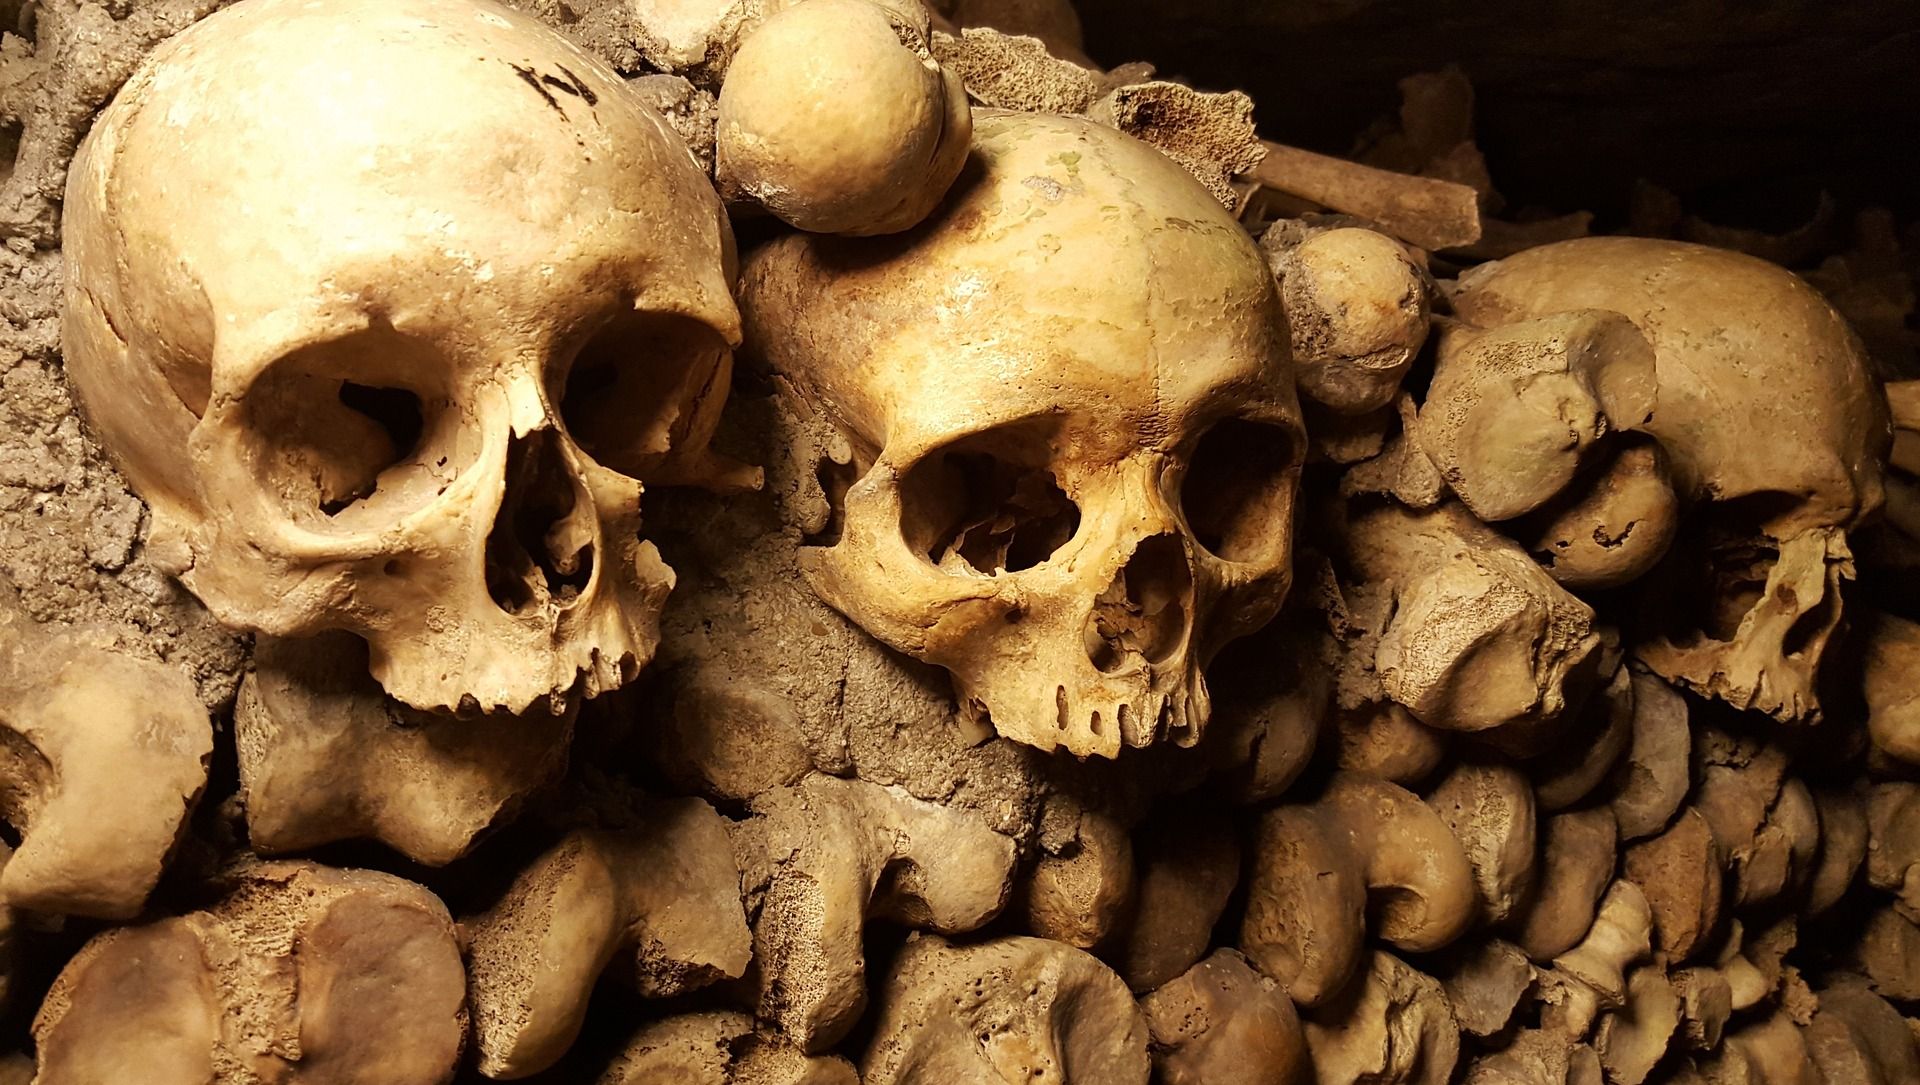 Skeletons in the Paris catacombs